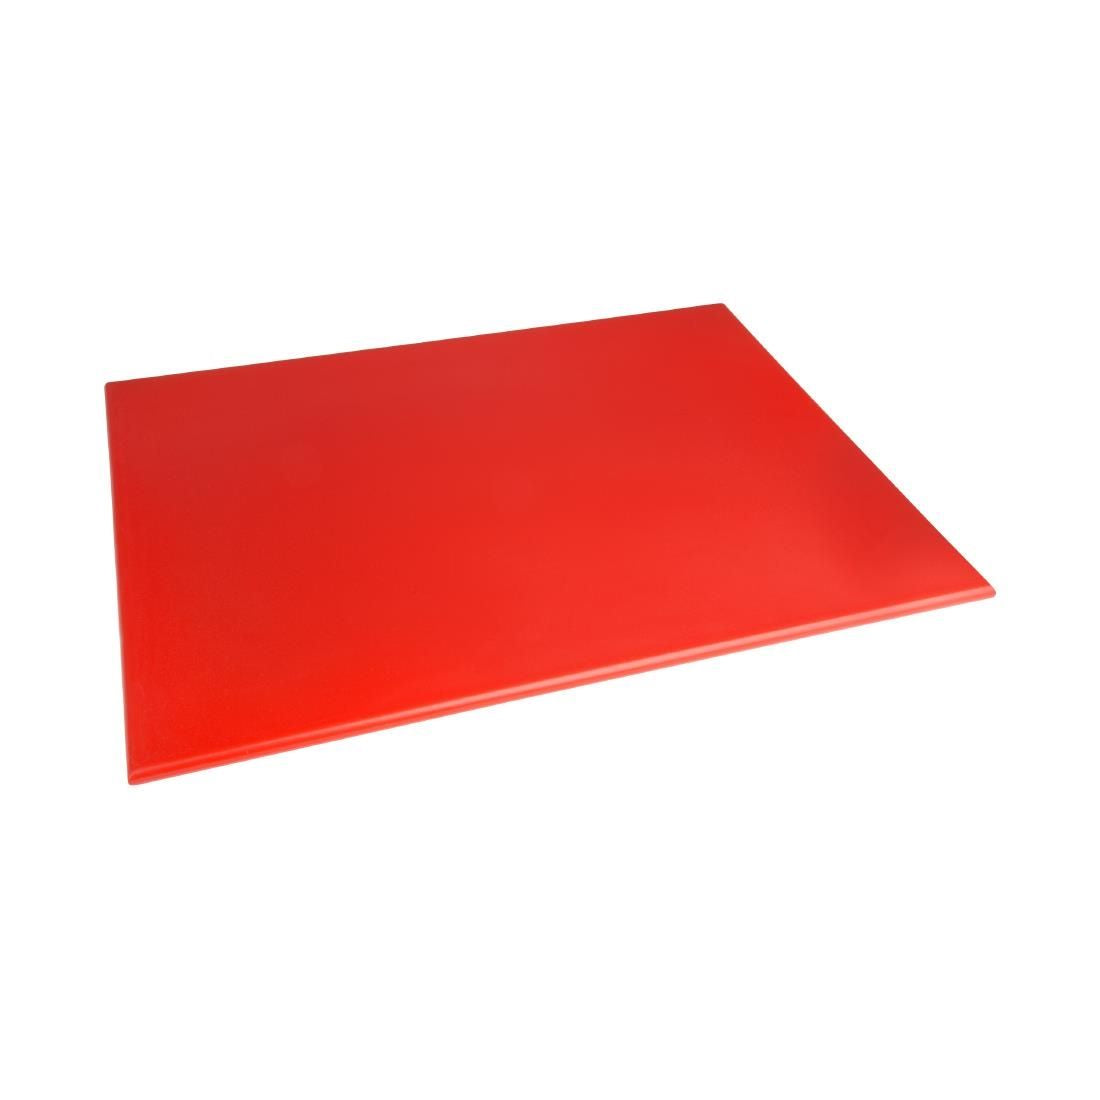 Hygiplas High Density Red Chopping Board Large JD Catering Equipment Solutions Ltd